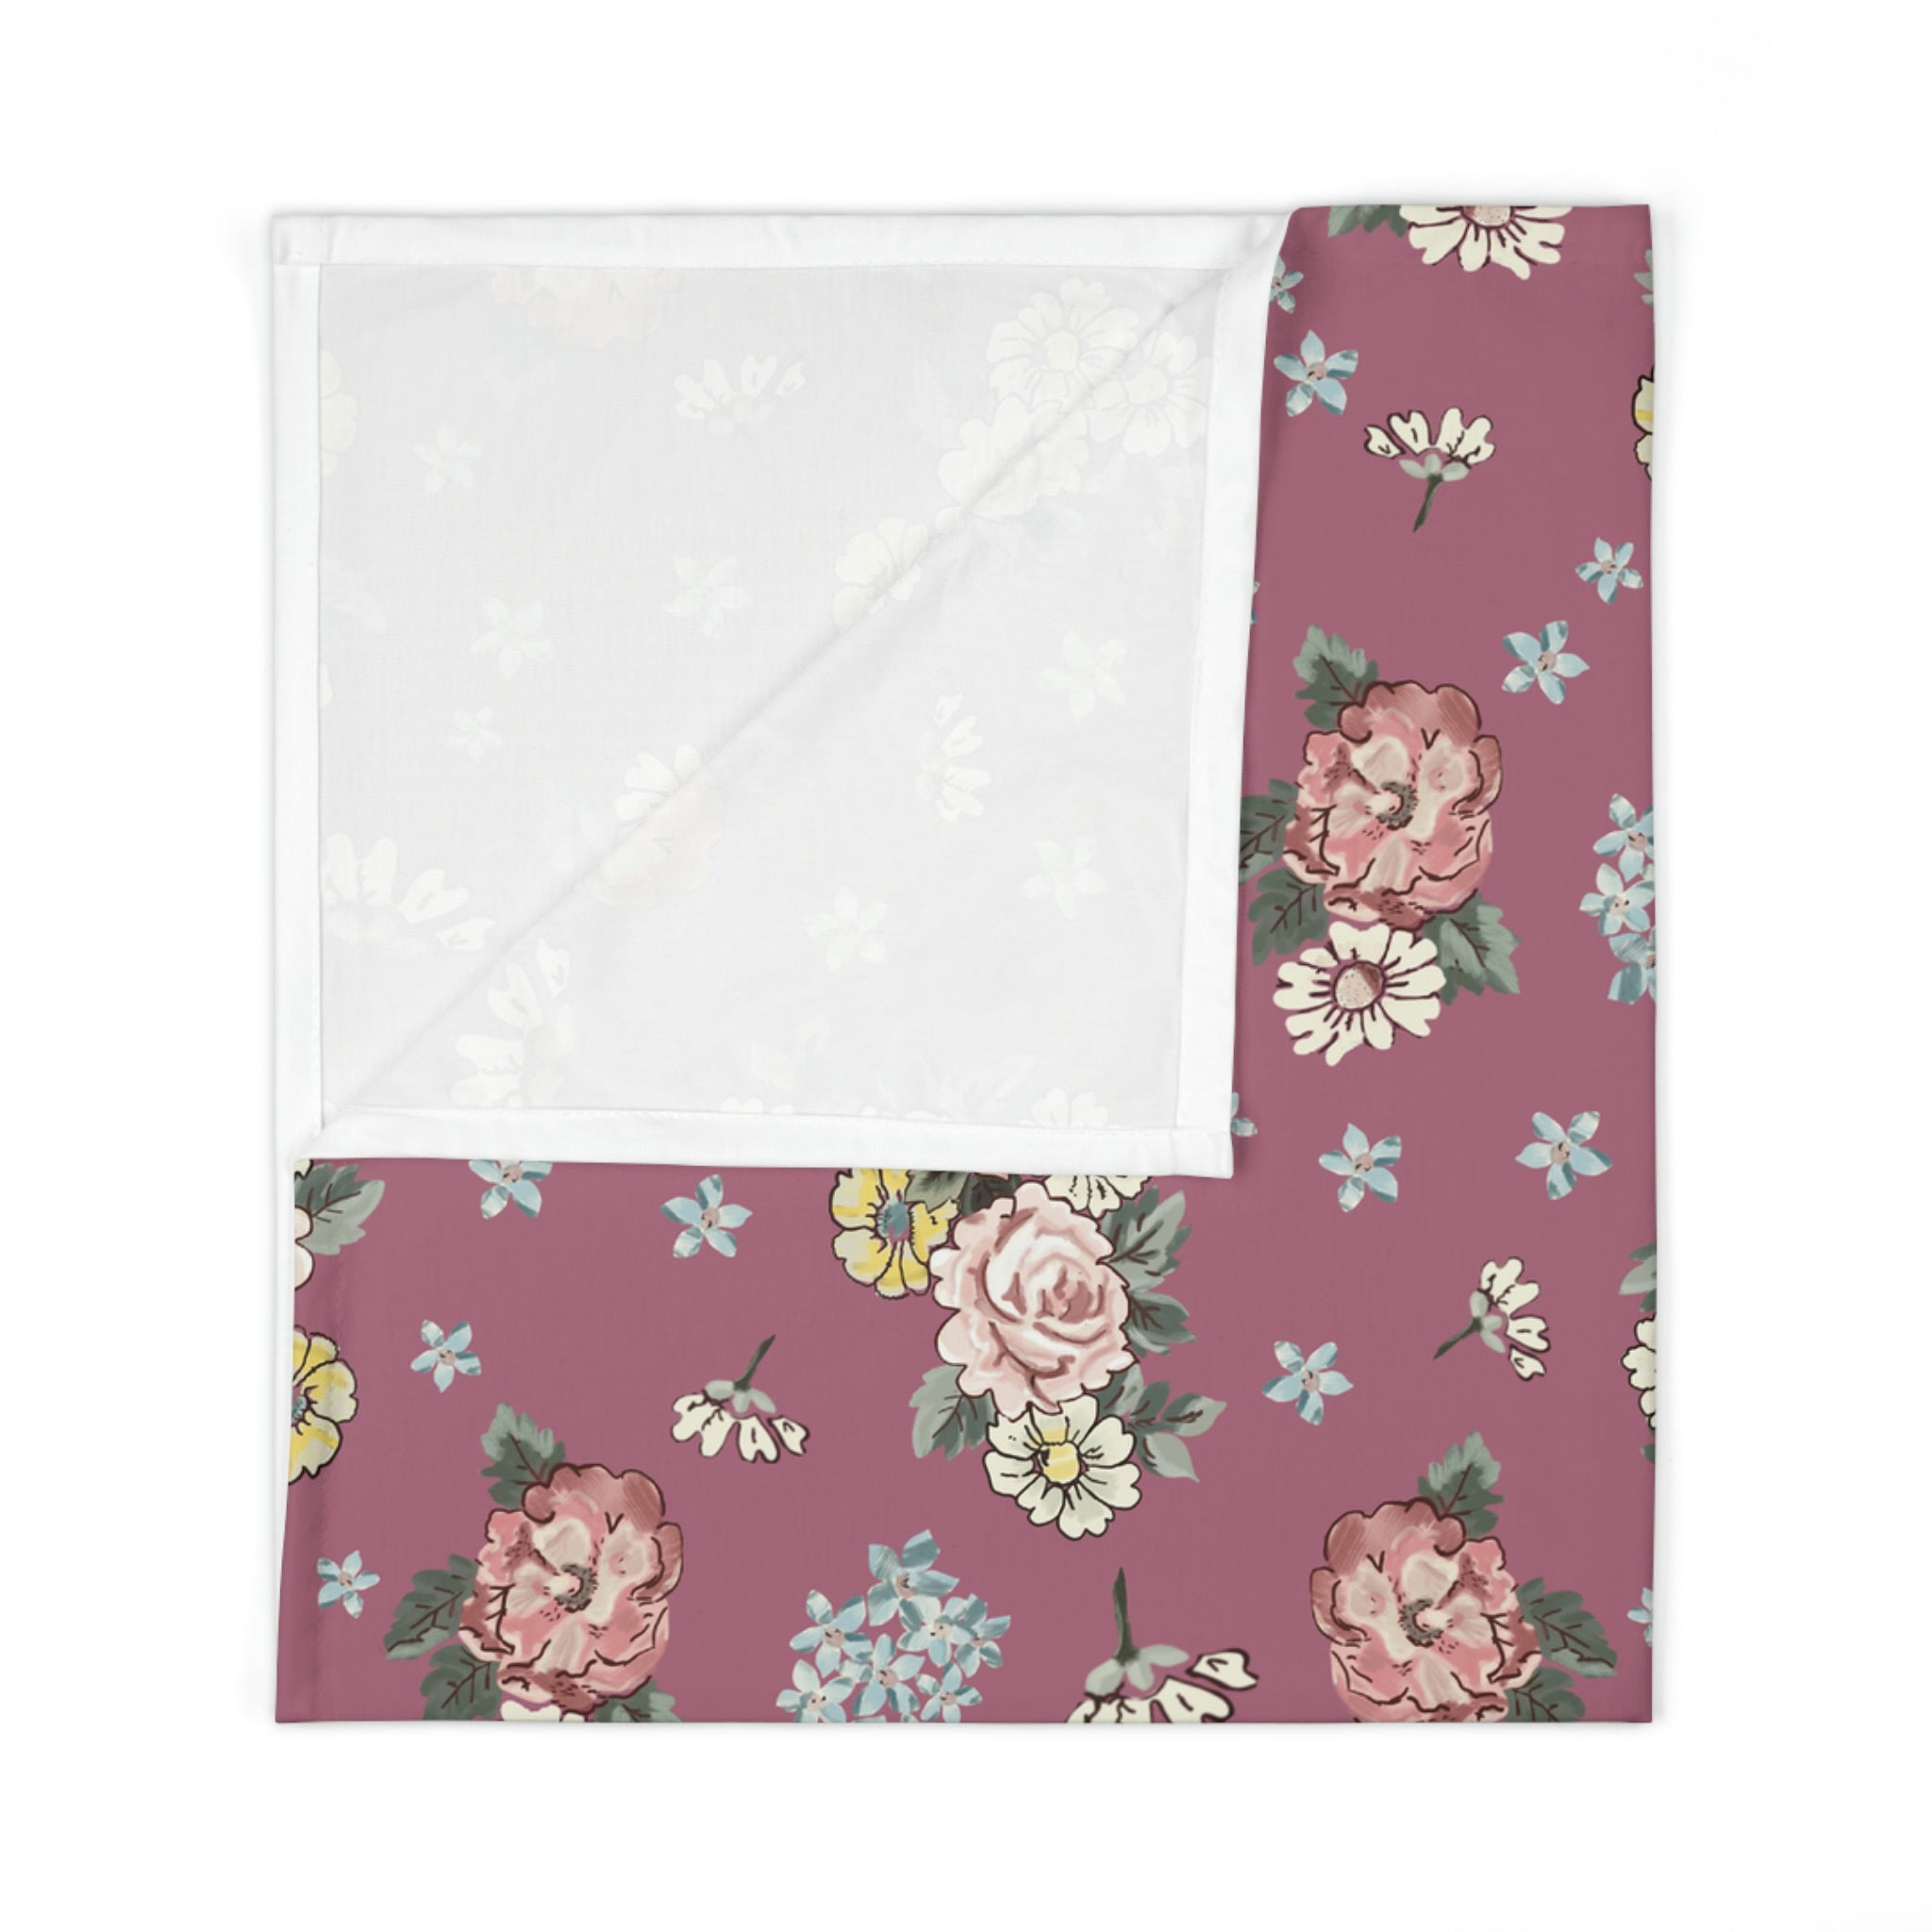 Baby Swaddle Blanket / Berry Floral